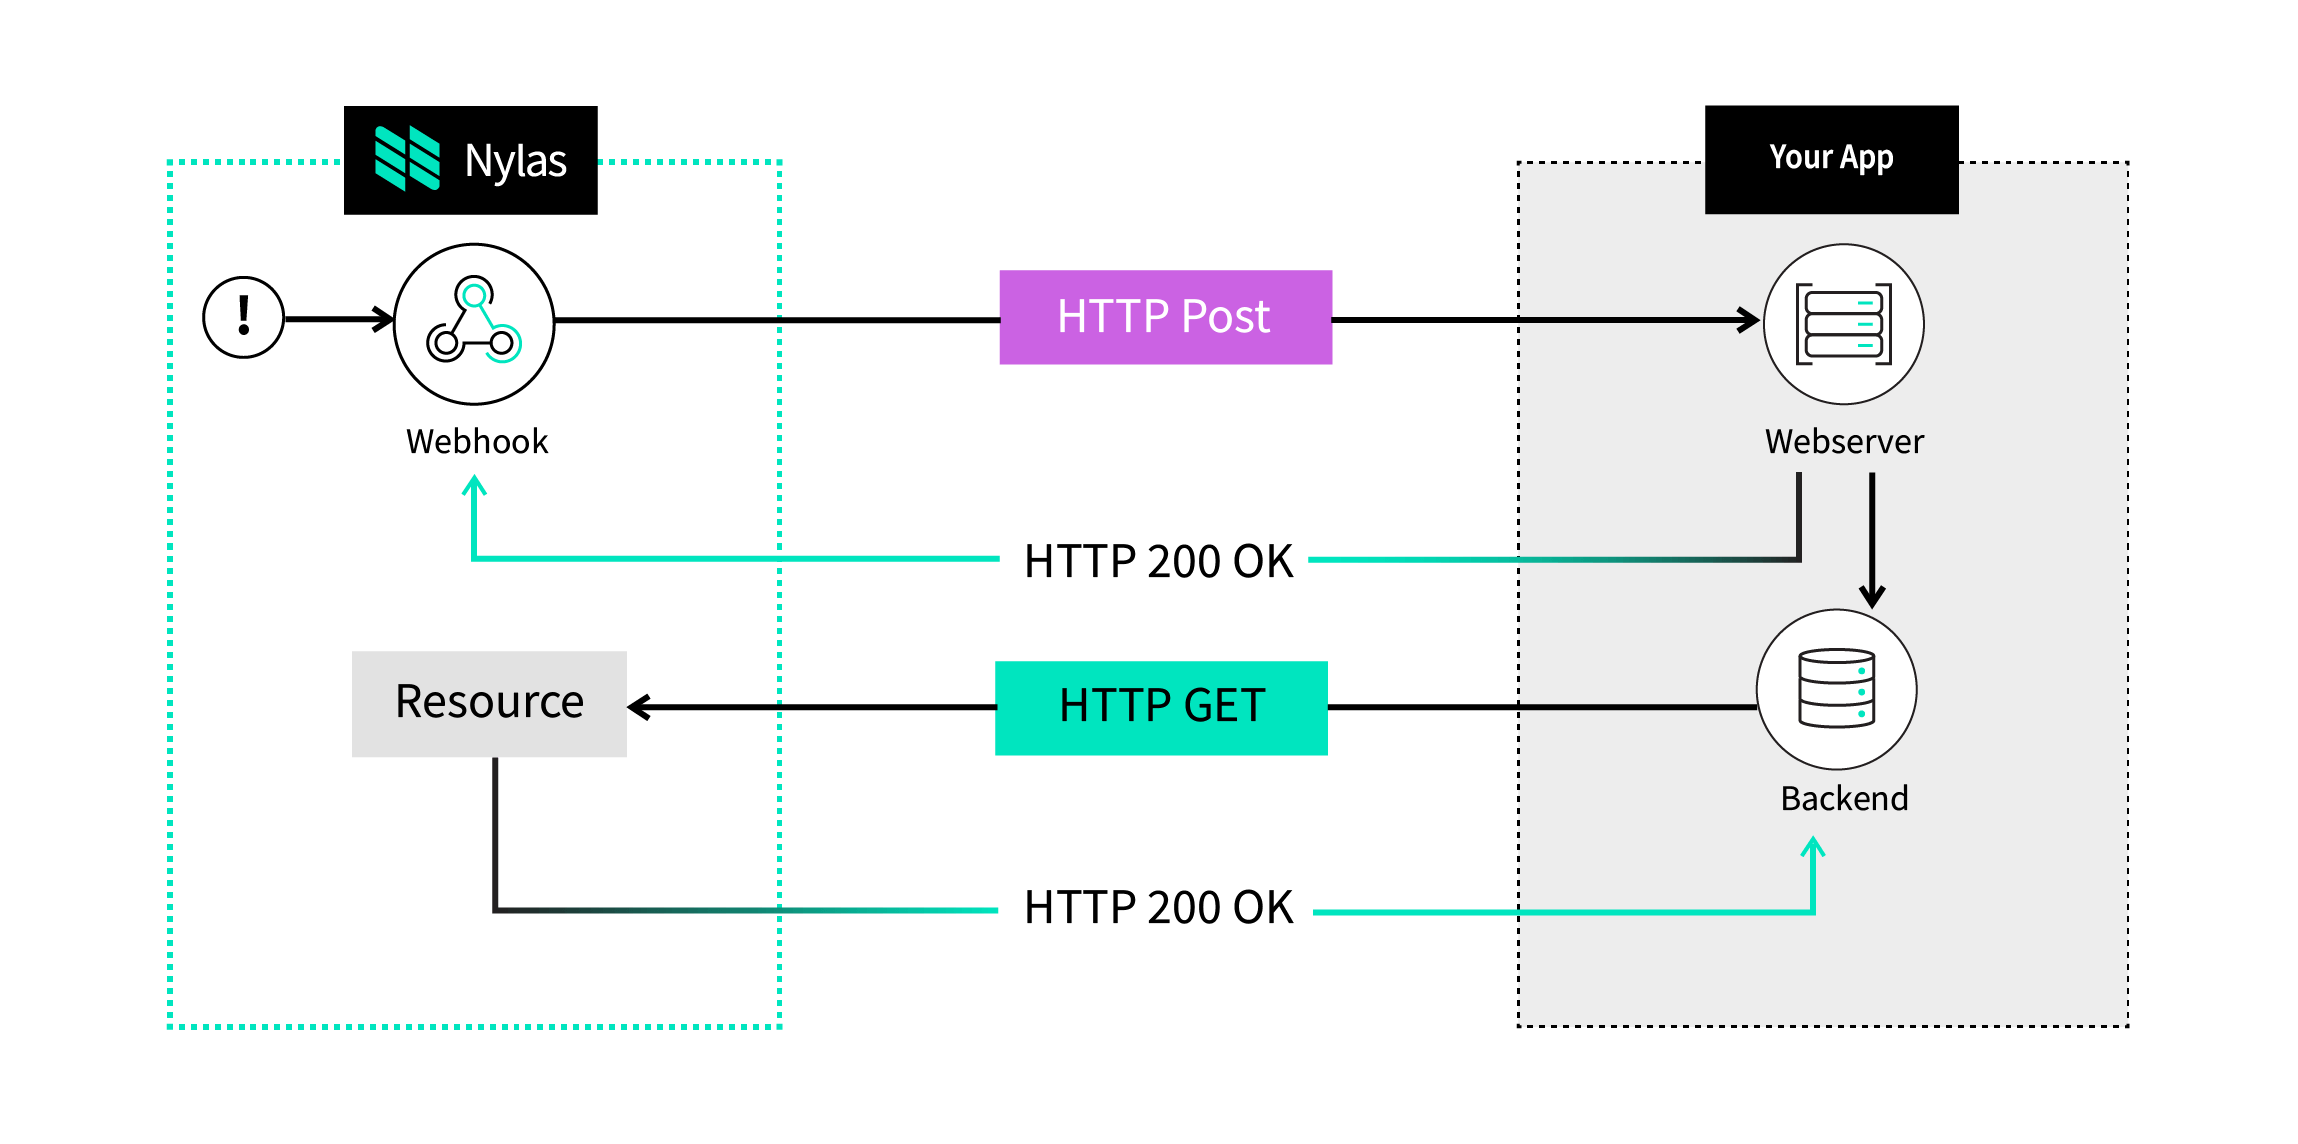 A flow diagram showing how Nylas generates and sends webhooks to your application.